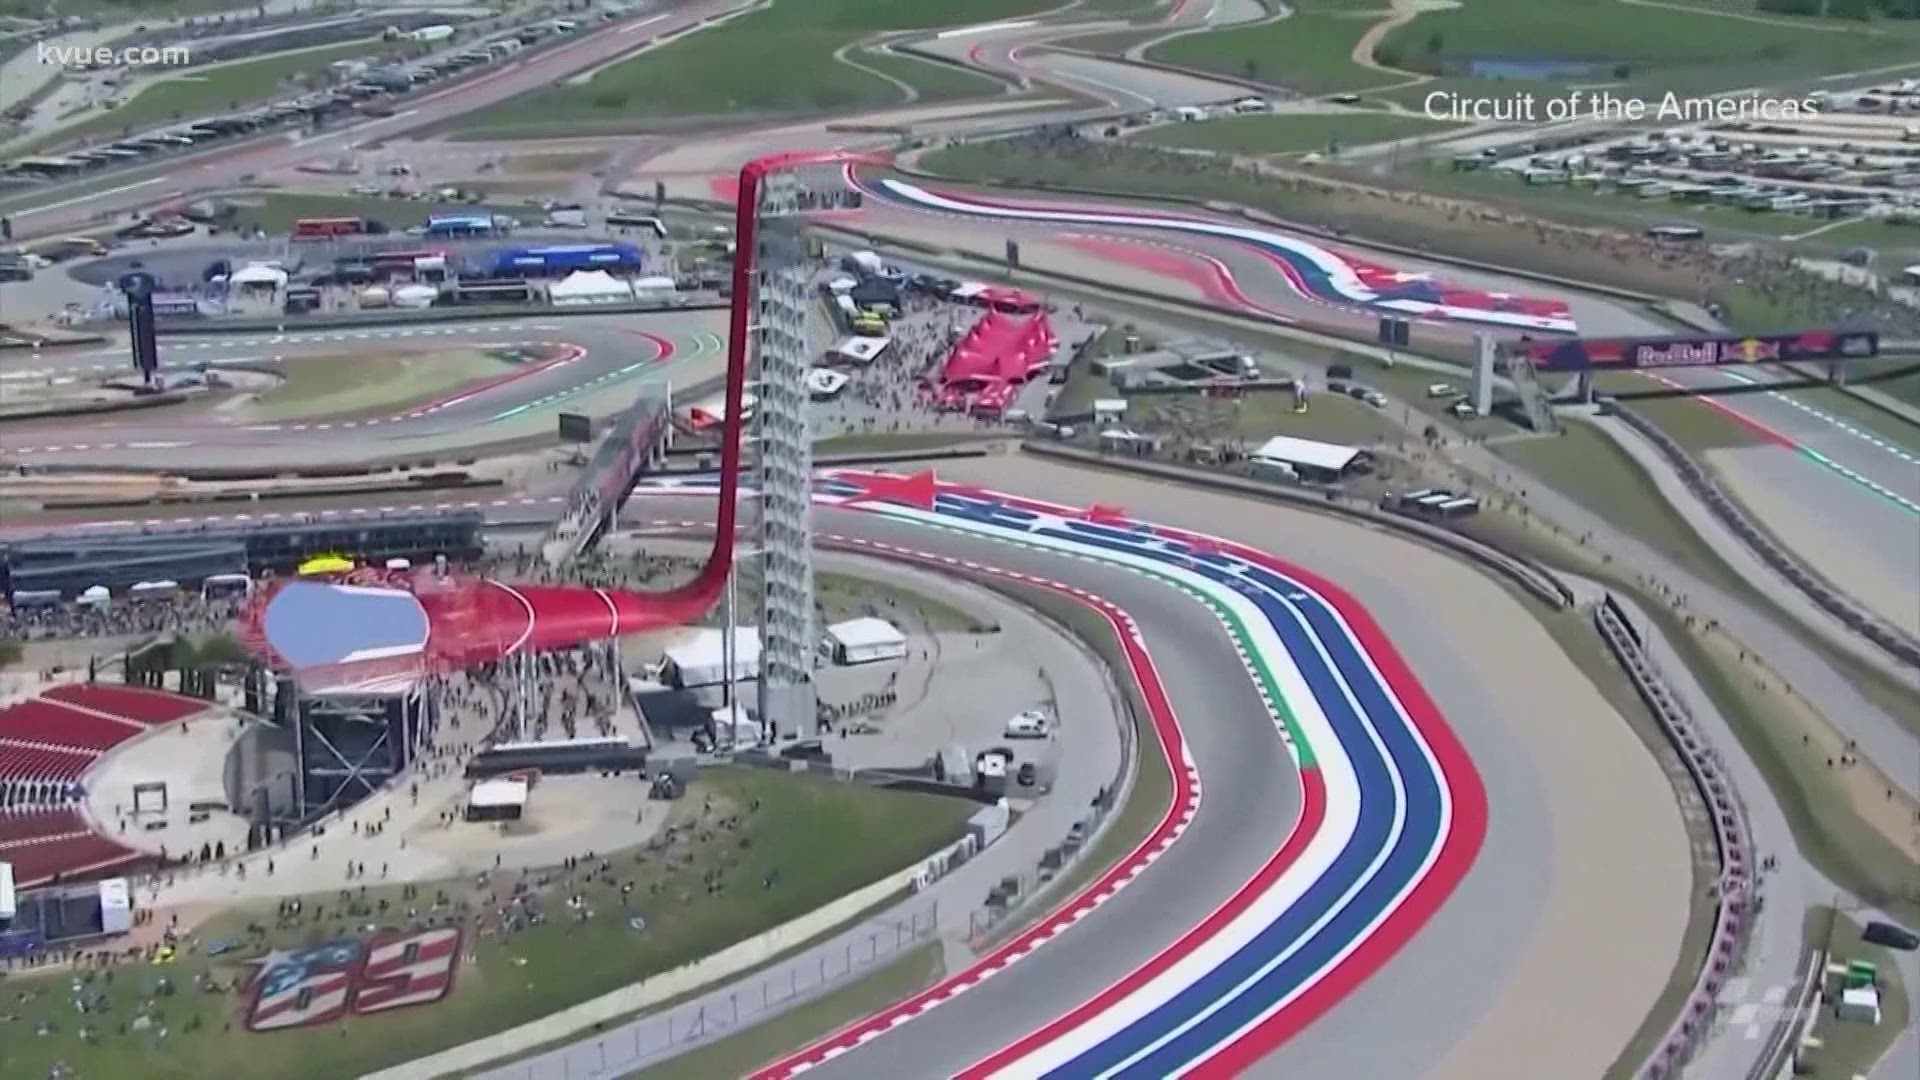 Tickets for the 3-day event at Circuit of the Americas are still on sale.